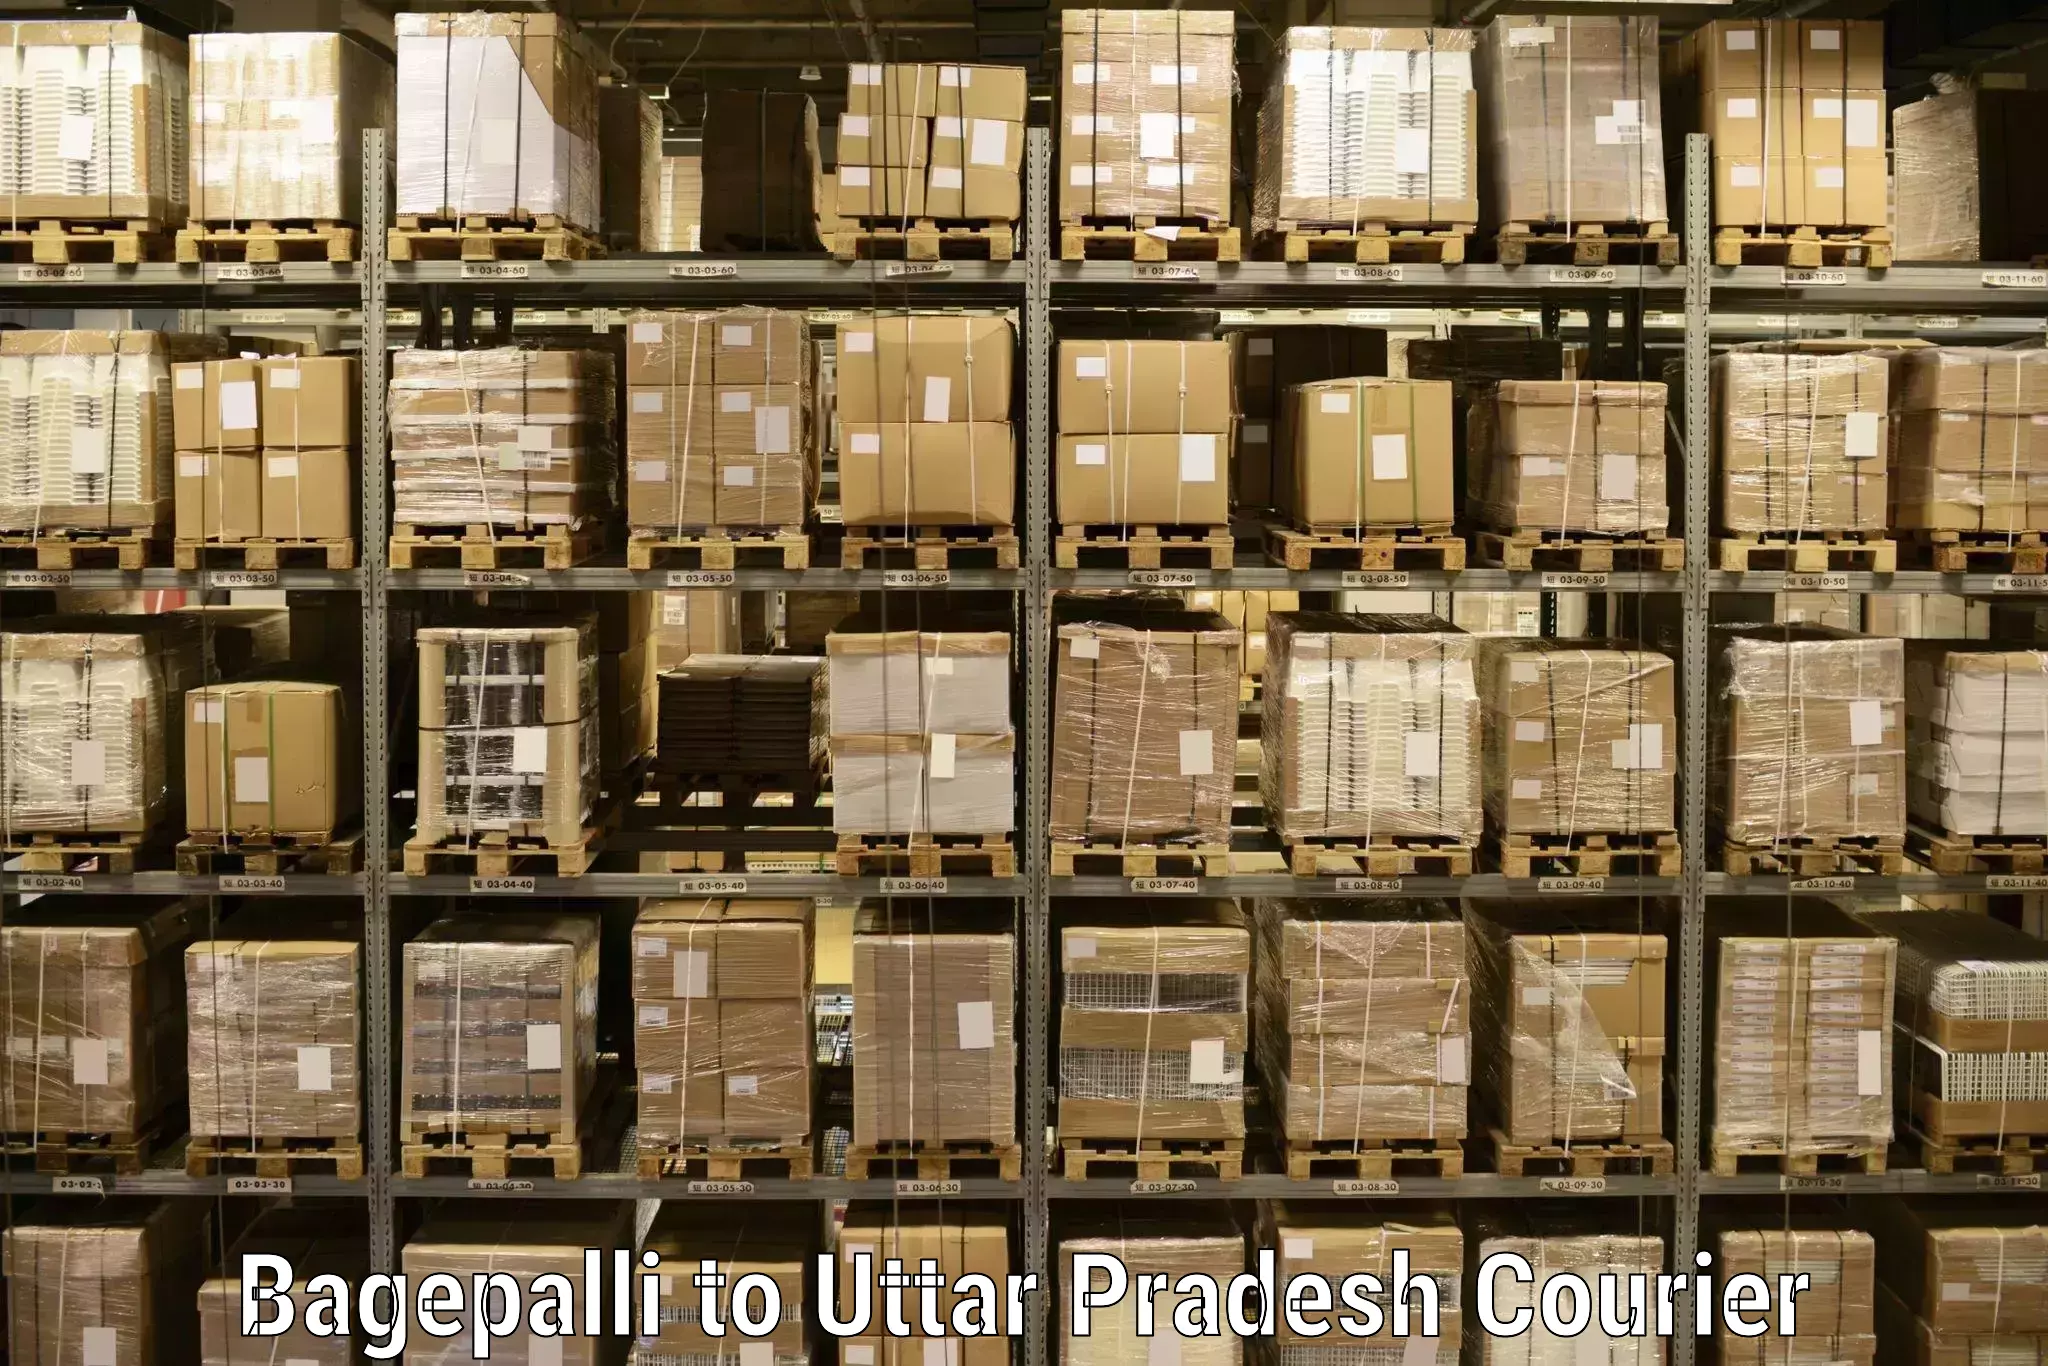 Reliable shipping partners Bagepalli to Kanpur